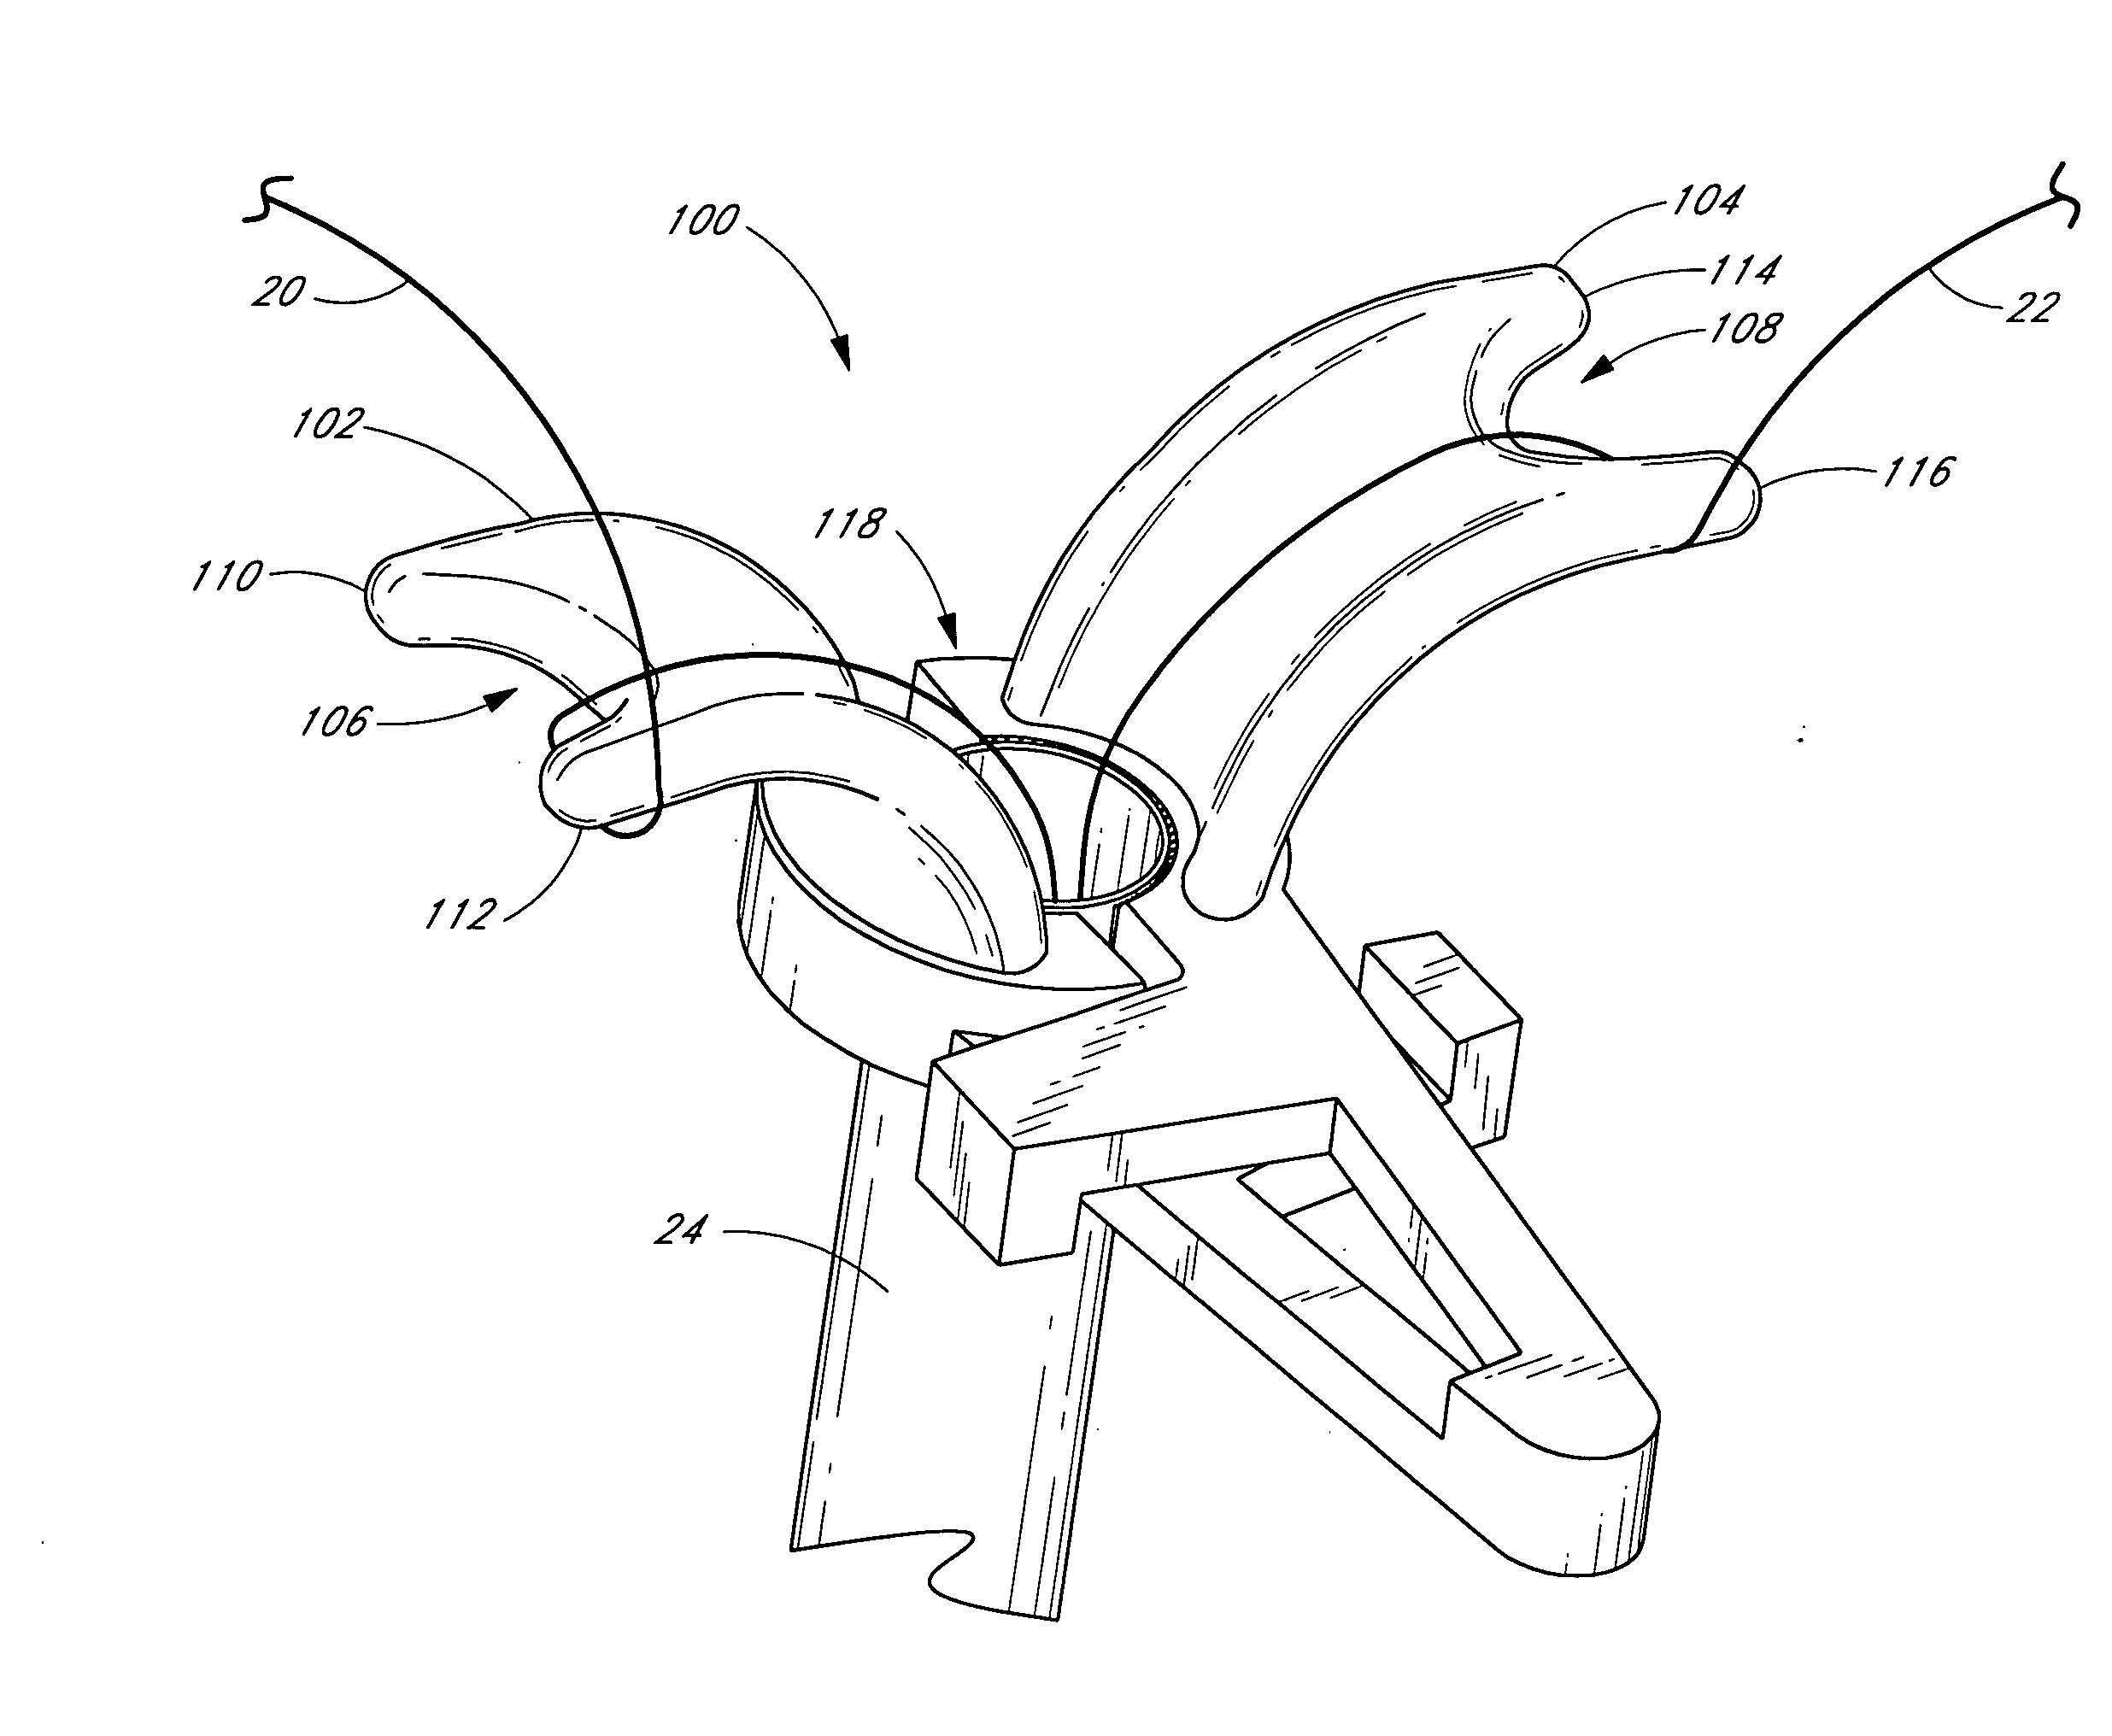 Method and apparatus for holding suture ends to facilitate tying of knots